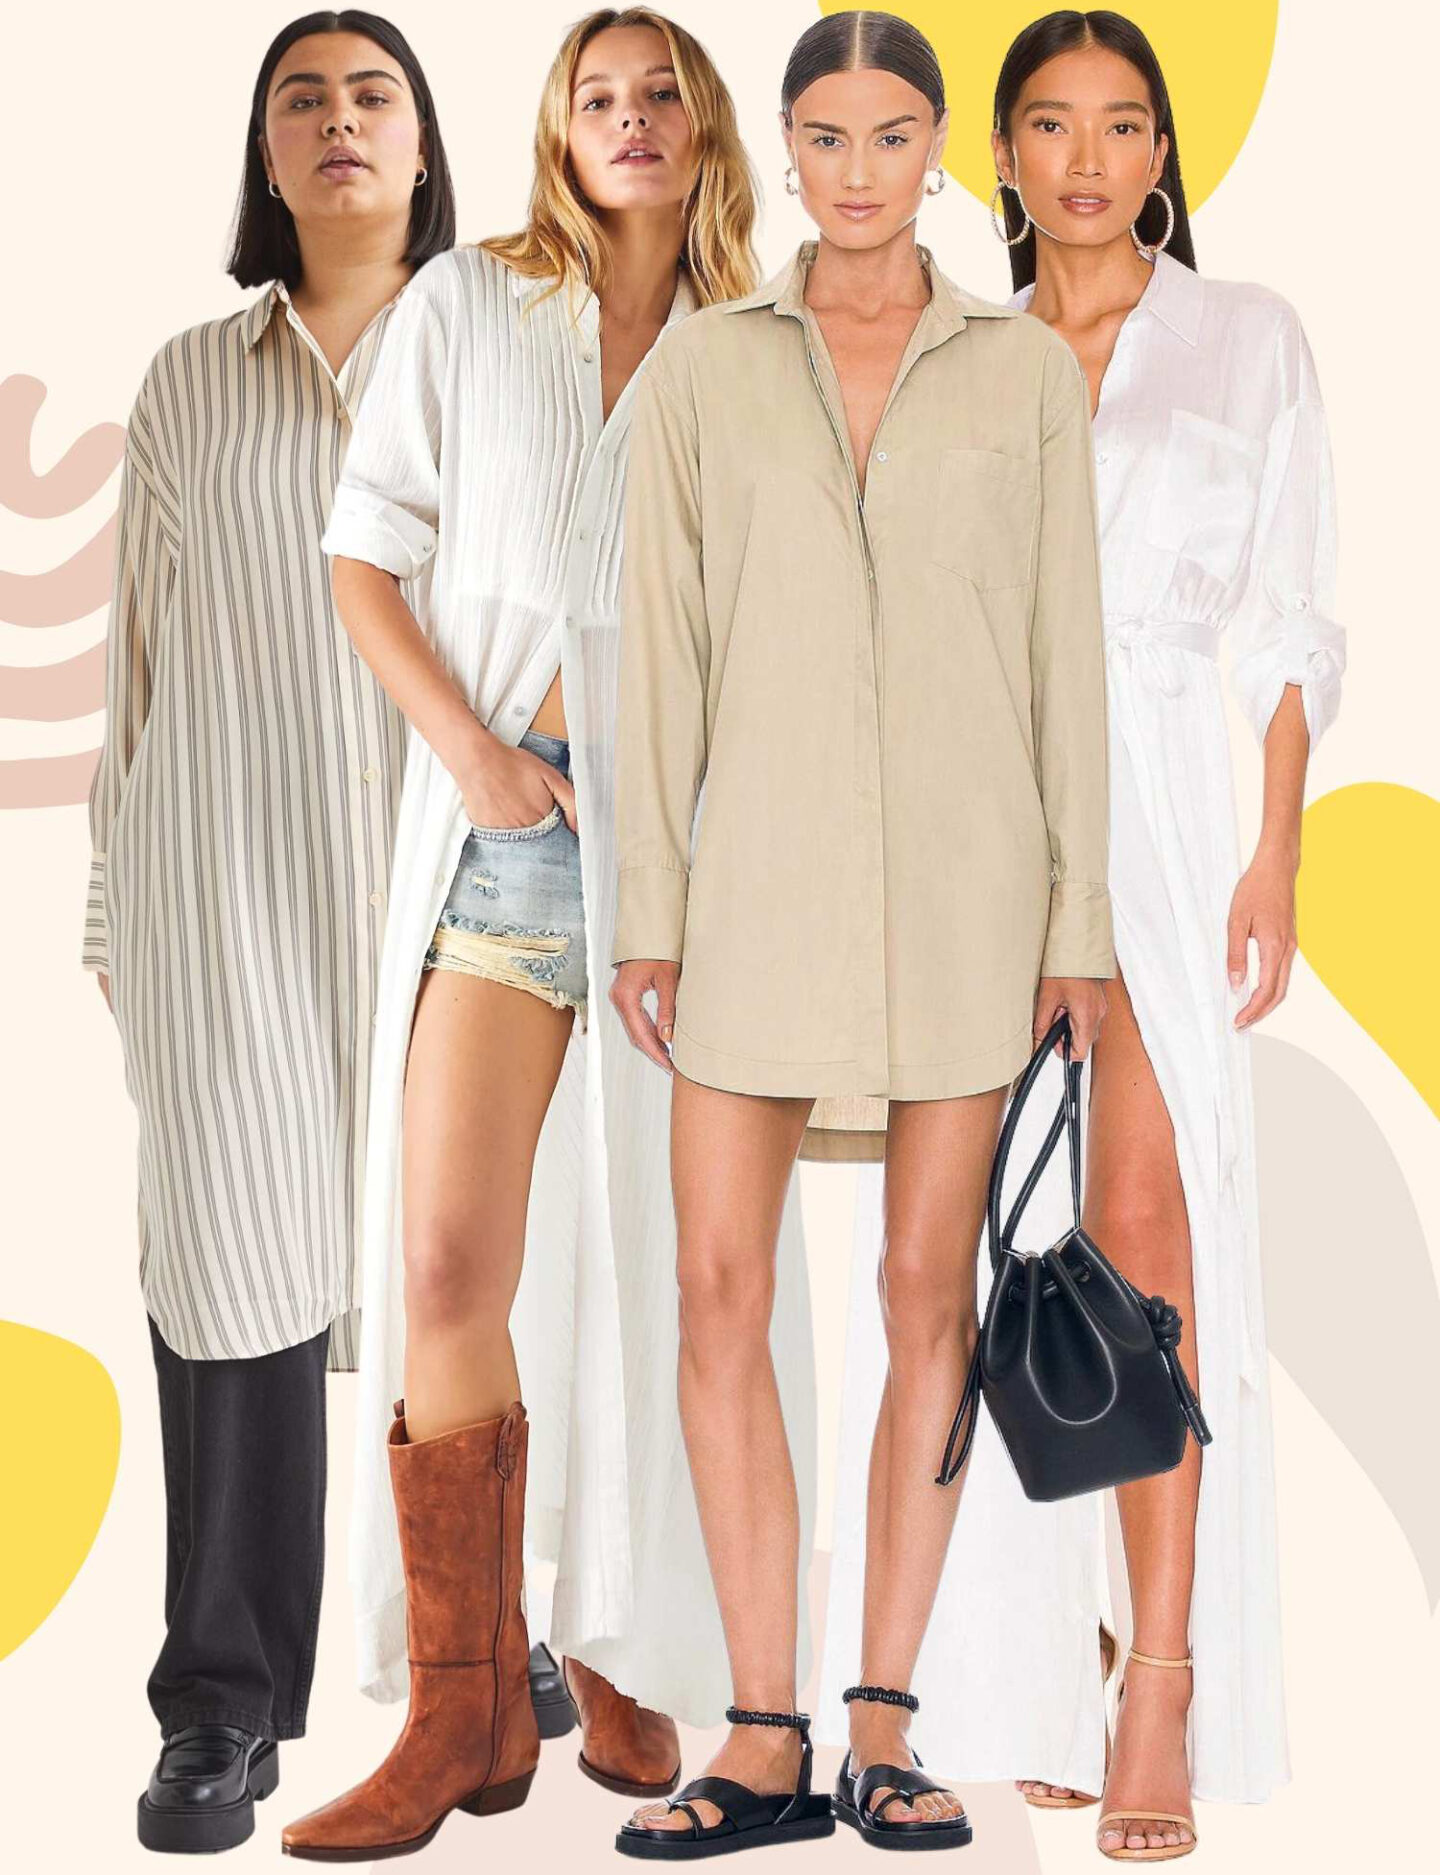 Collage of 4 women wearing different shirt dress outfits.